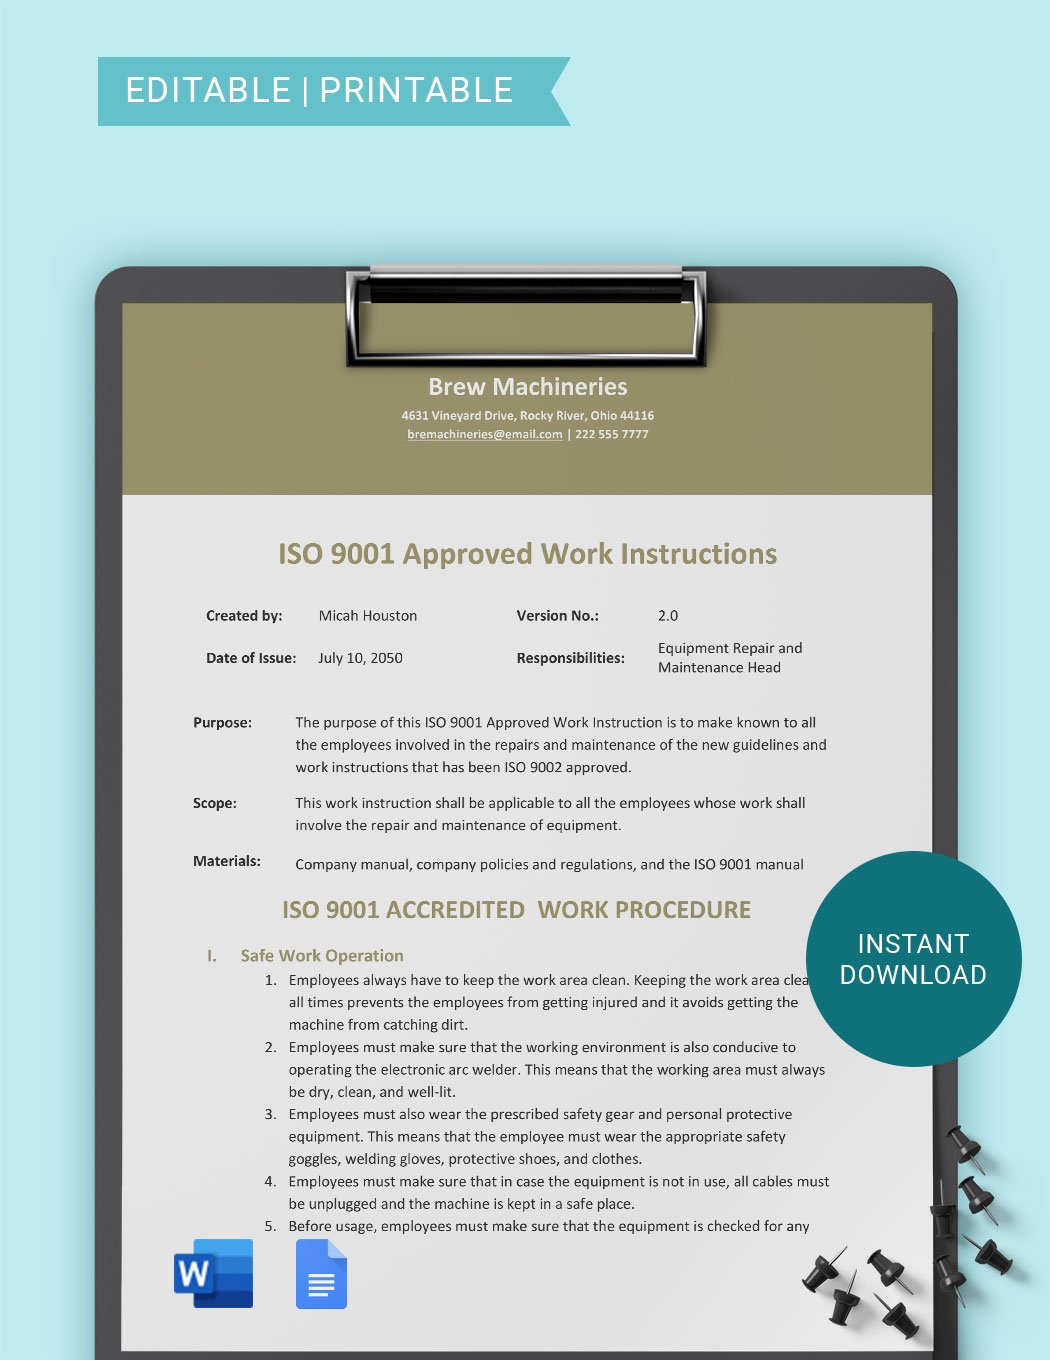 ISO 9001 Work Instruction Template in Word, Google Docs